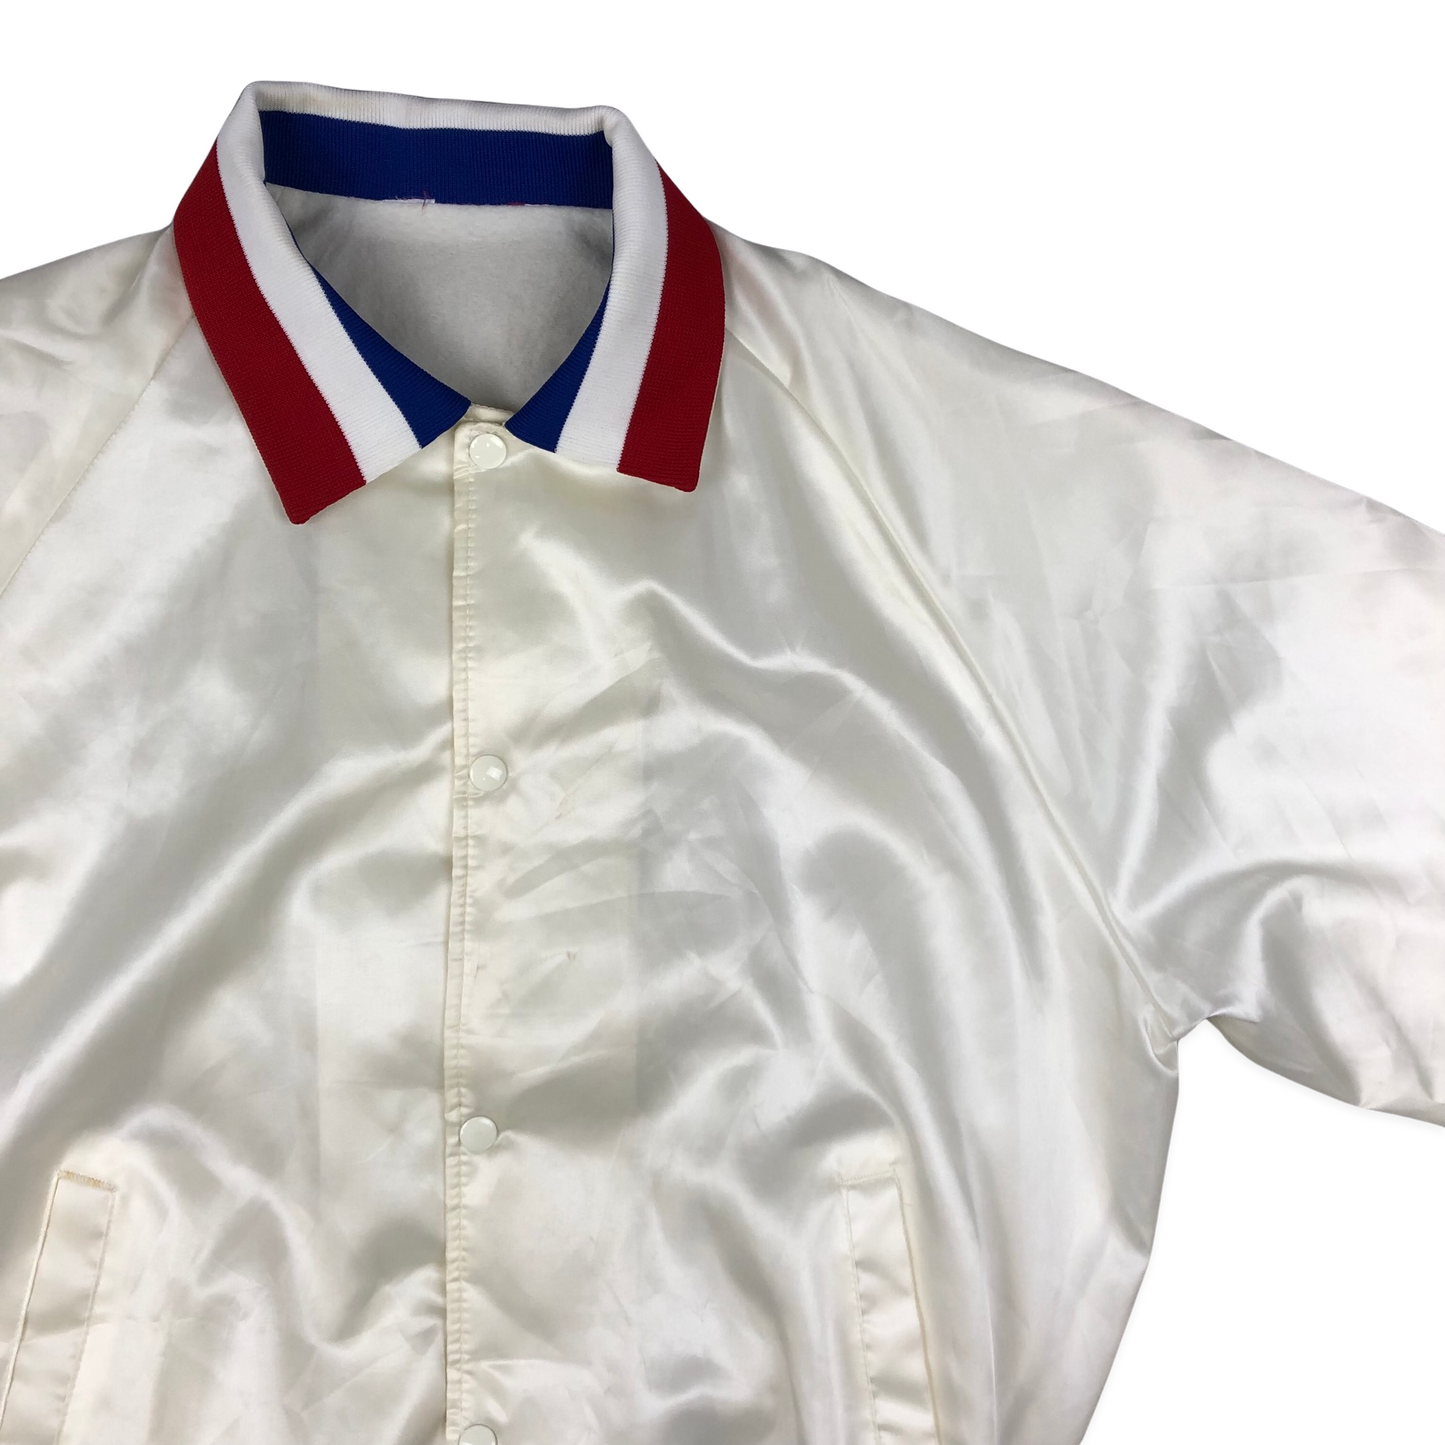 Vintage 80s "USA" White, Red, and Blue Varsity Windbreaker